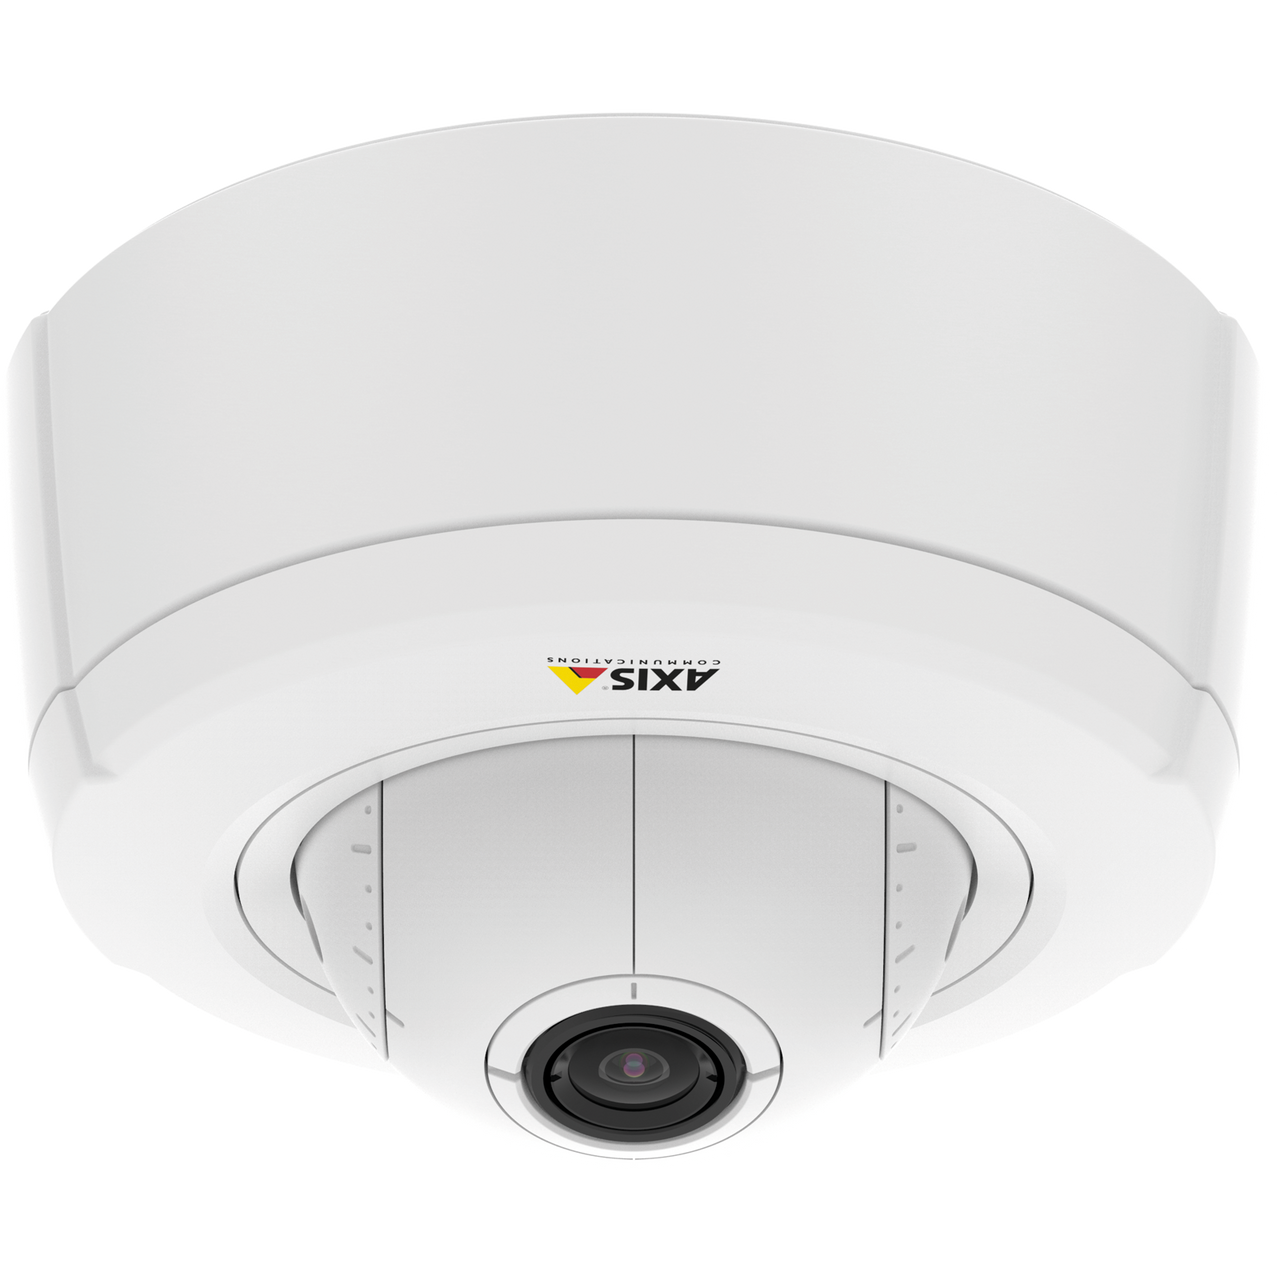 AXIS P1290-E 4 MM 8.3 FPS Discreet, budget-friendly and outdoor ready thermal detection